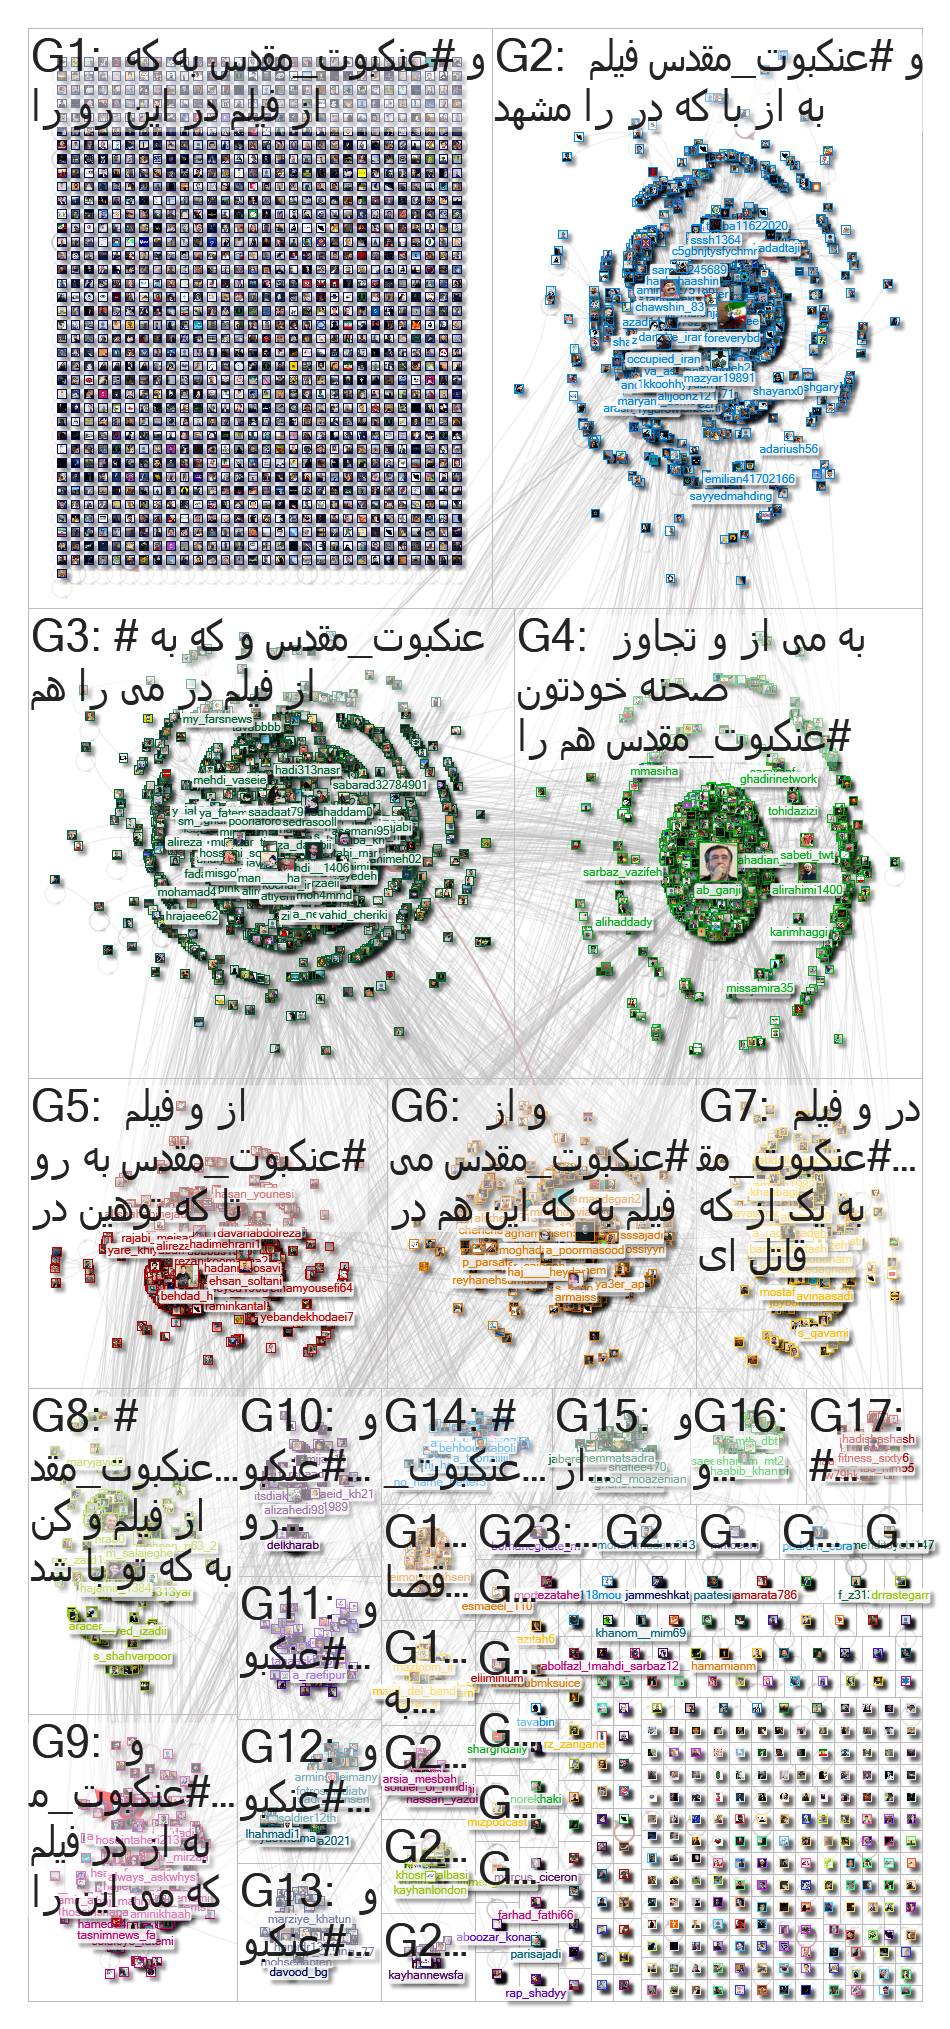 %23%D8%B9%D9%86%DA%A9%D8%A8%D9%88%D8%AA_%D9%85%D9%82%D8%AF%D8%B3 Twitter NodeXL SNA Map and Report f